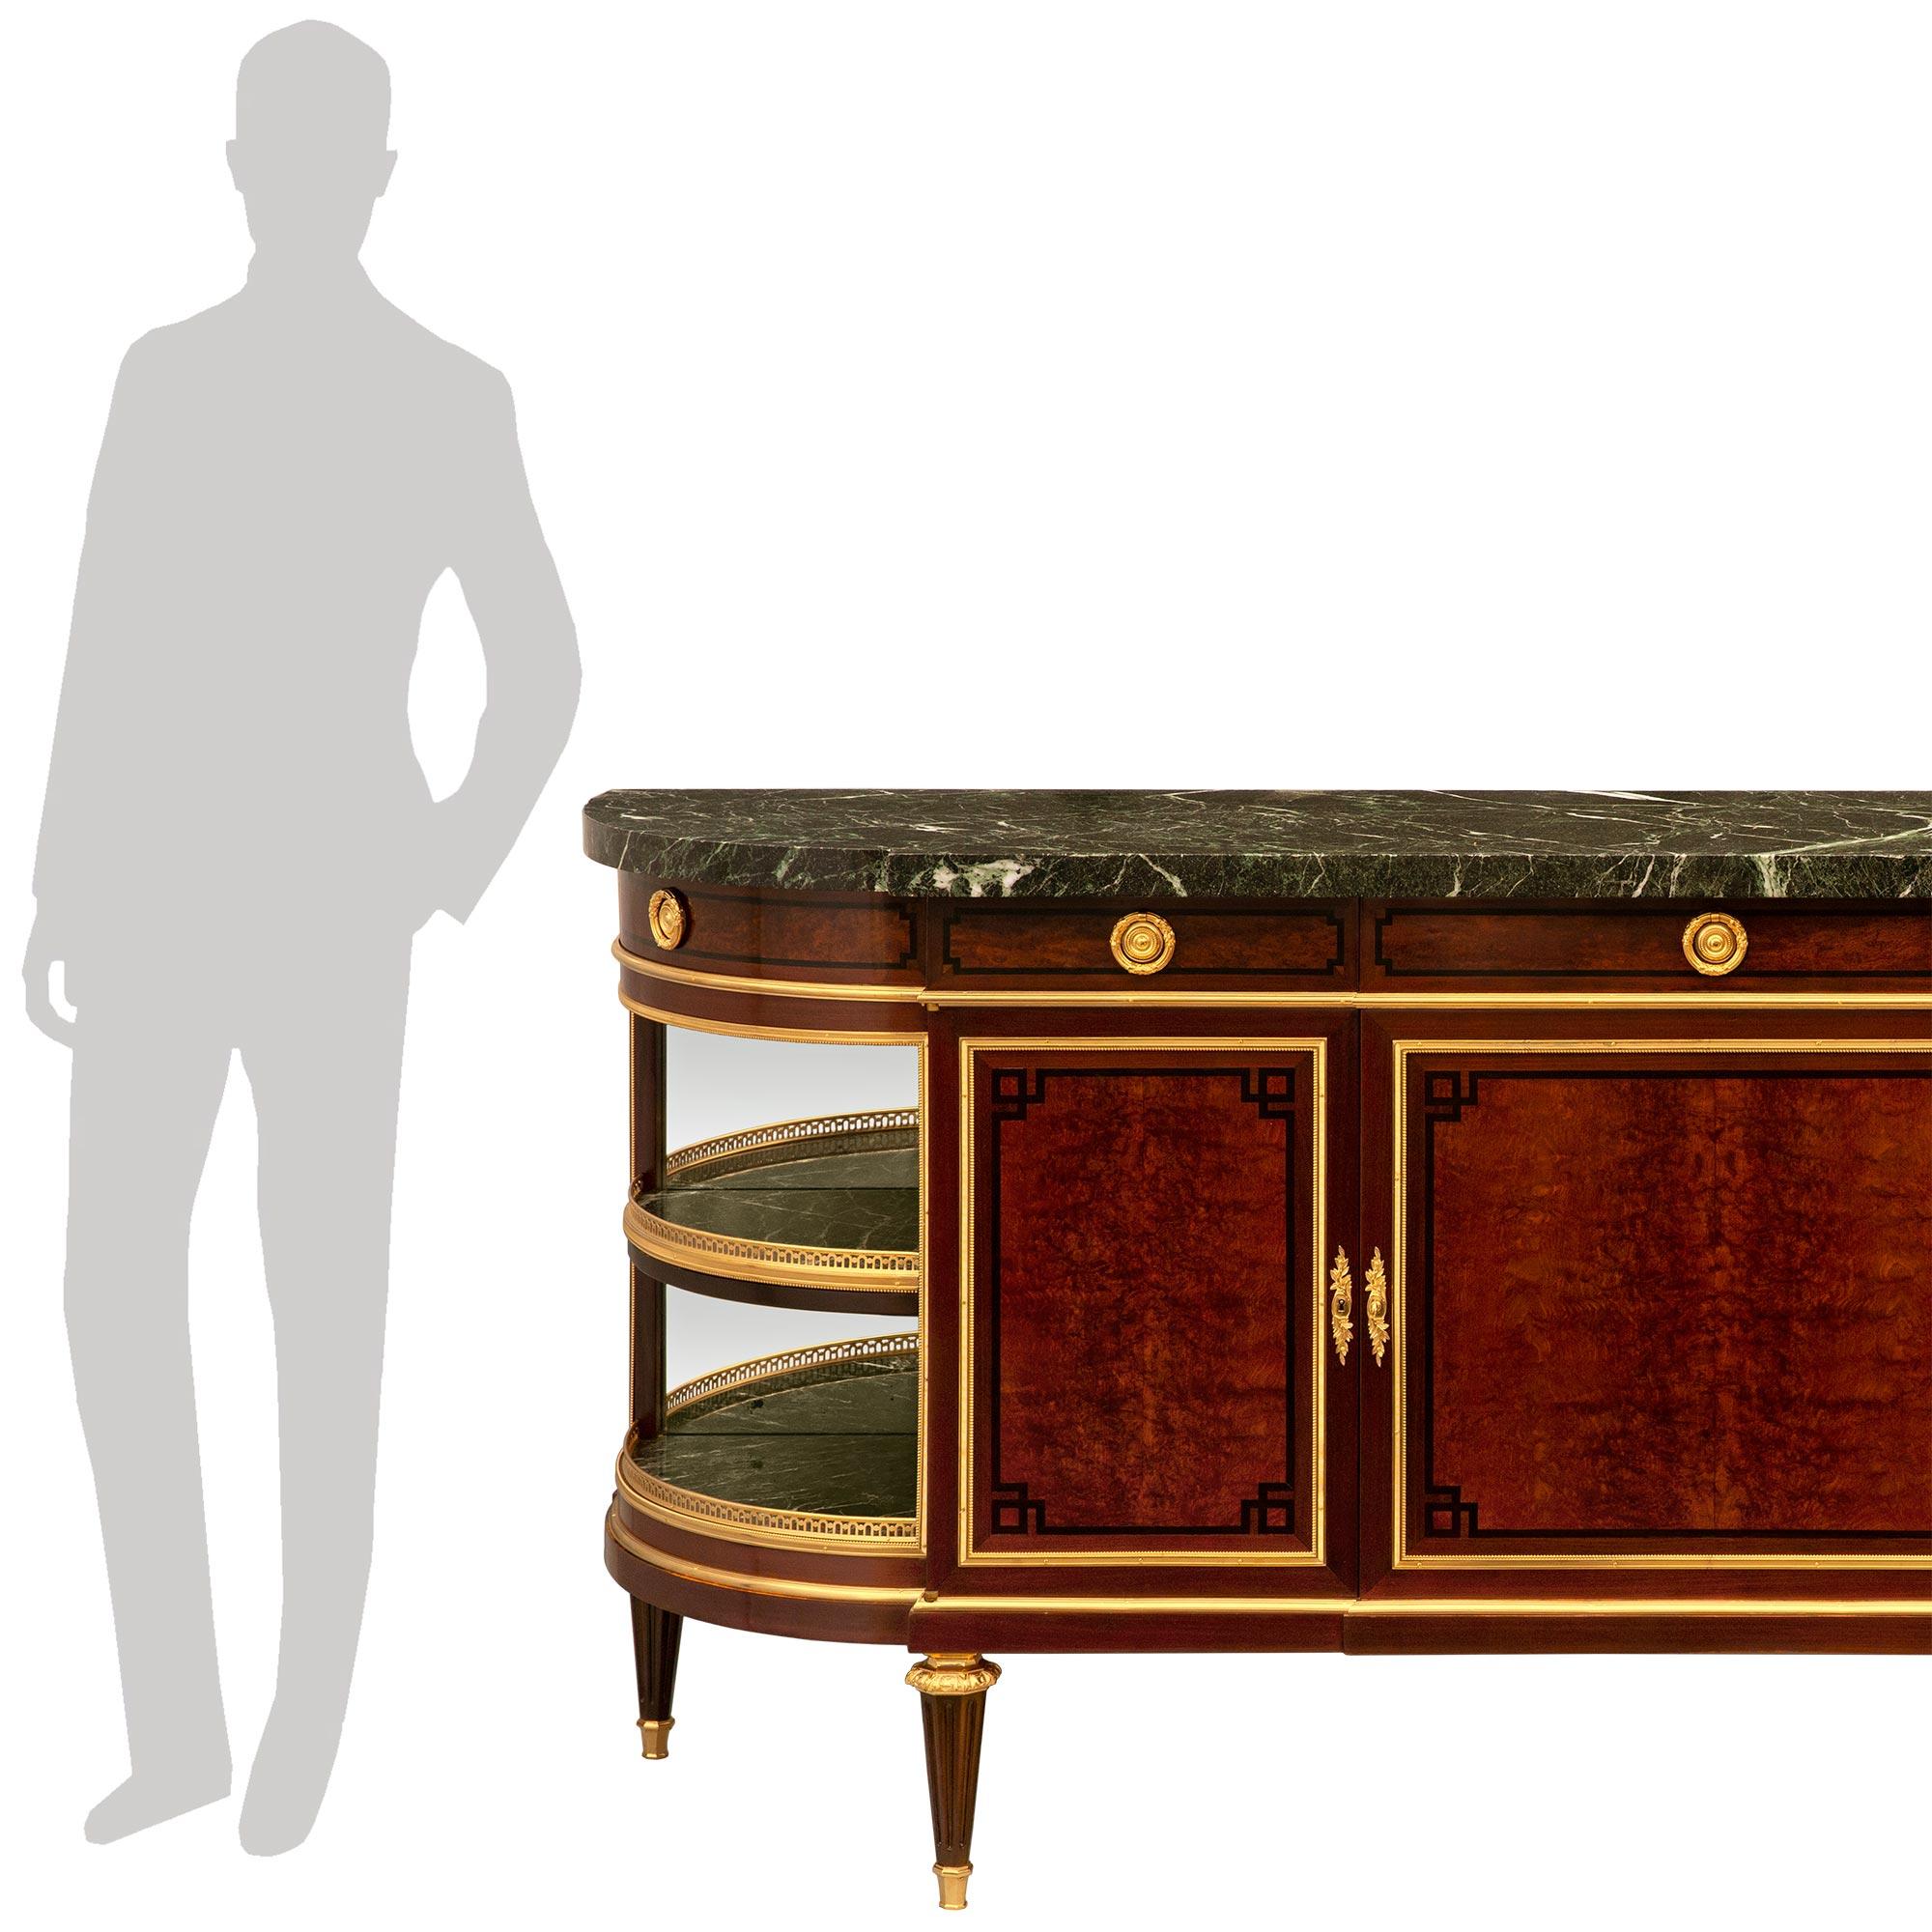 An impressive and most elegant French 19th century Louis XVI st. Mahogany, Carpathian Burl wood, Ormolu and Vert de Patricia marble buffet. This highly detailed buffet is raised on four circular tapered and fluted Mahogany legs with a top octagon